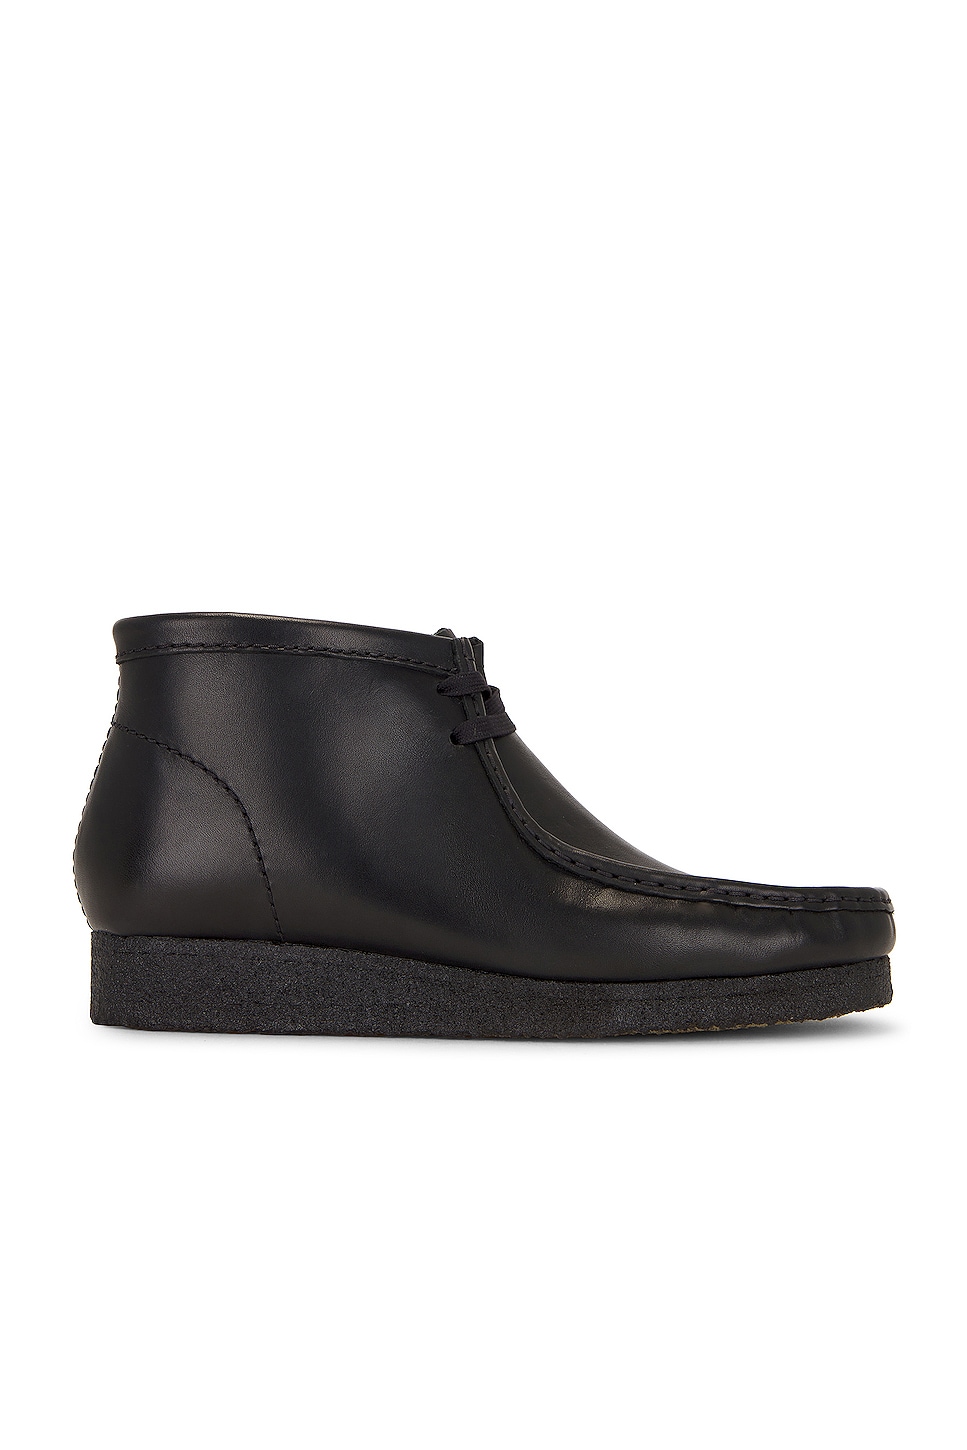 Wallabee Boot in Black